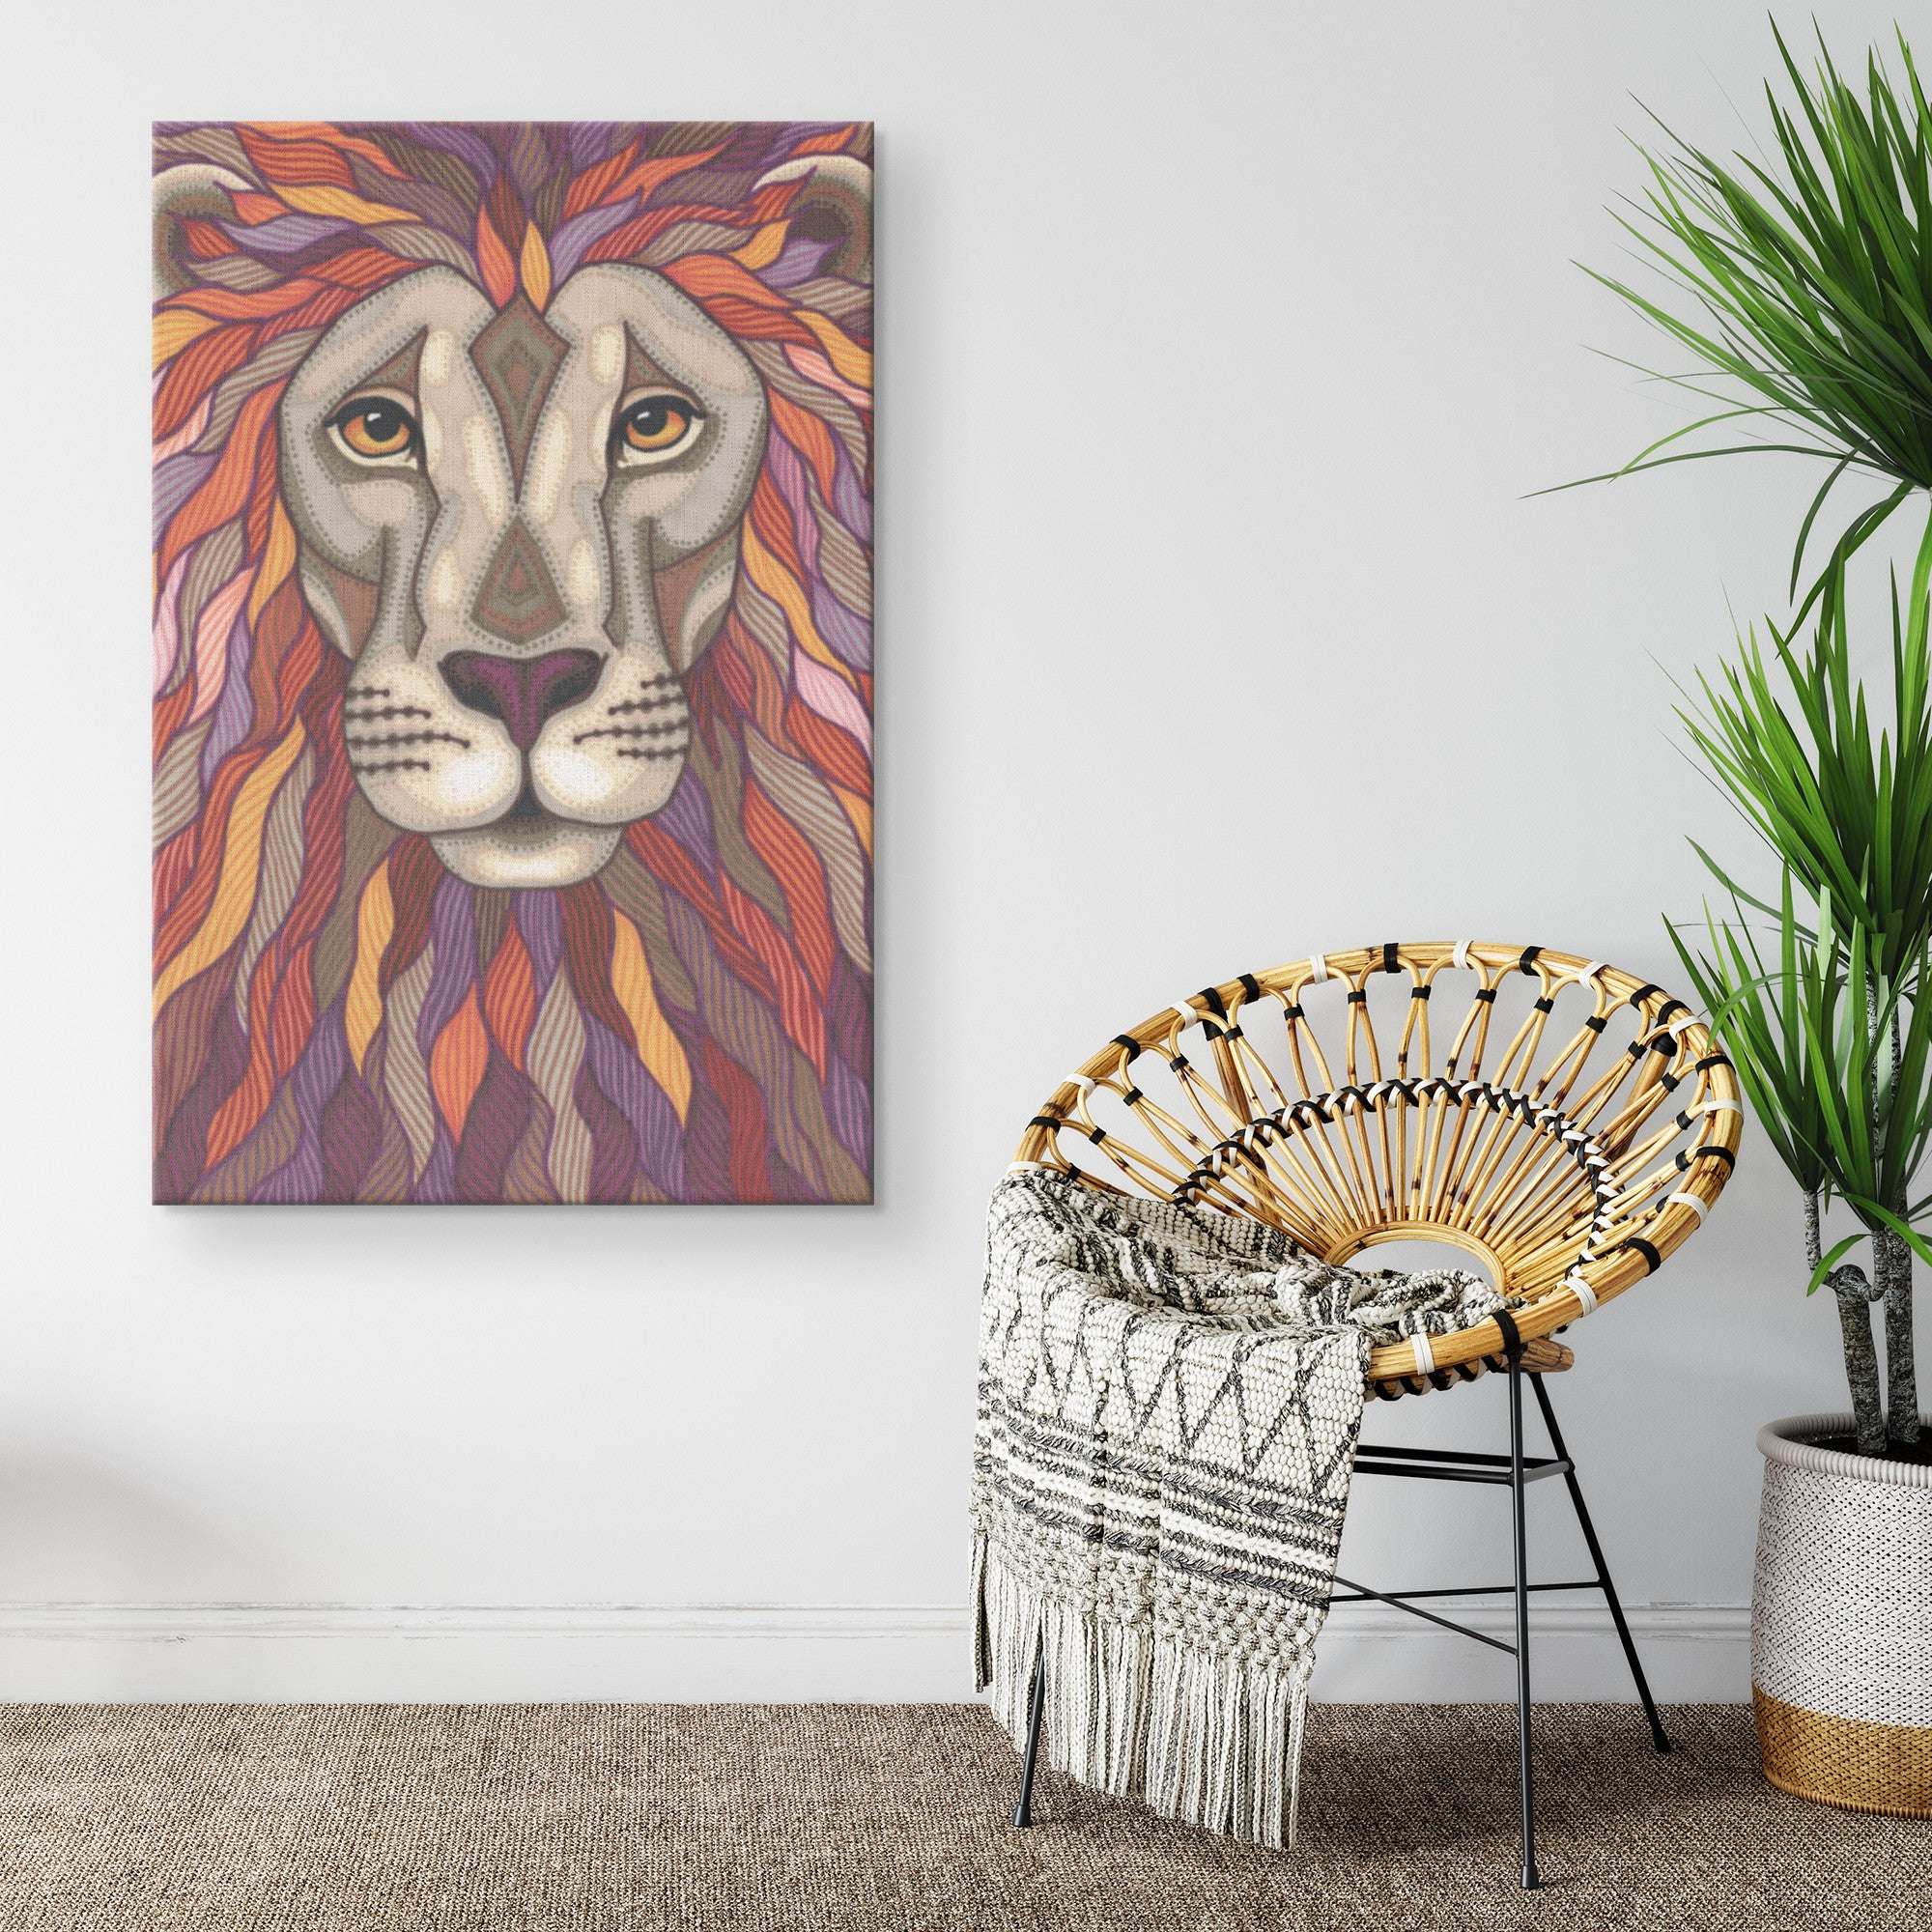 Colorful Lion Pride Canvas Print hanging on a wall next to a stylish woven chair with a blanket, placed in a modern room with a green potted plant.